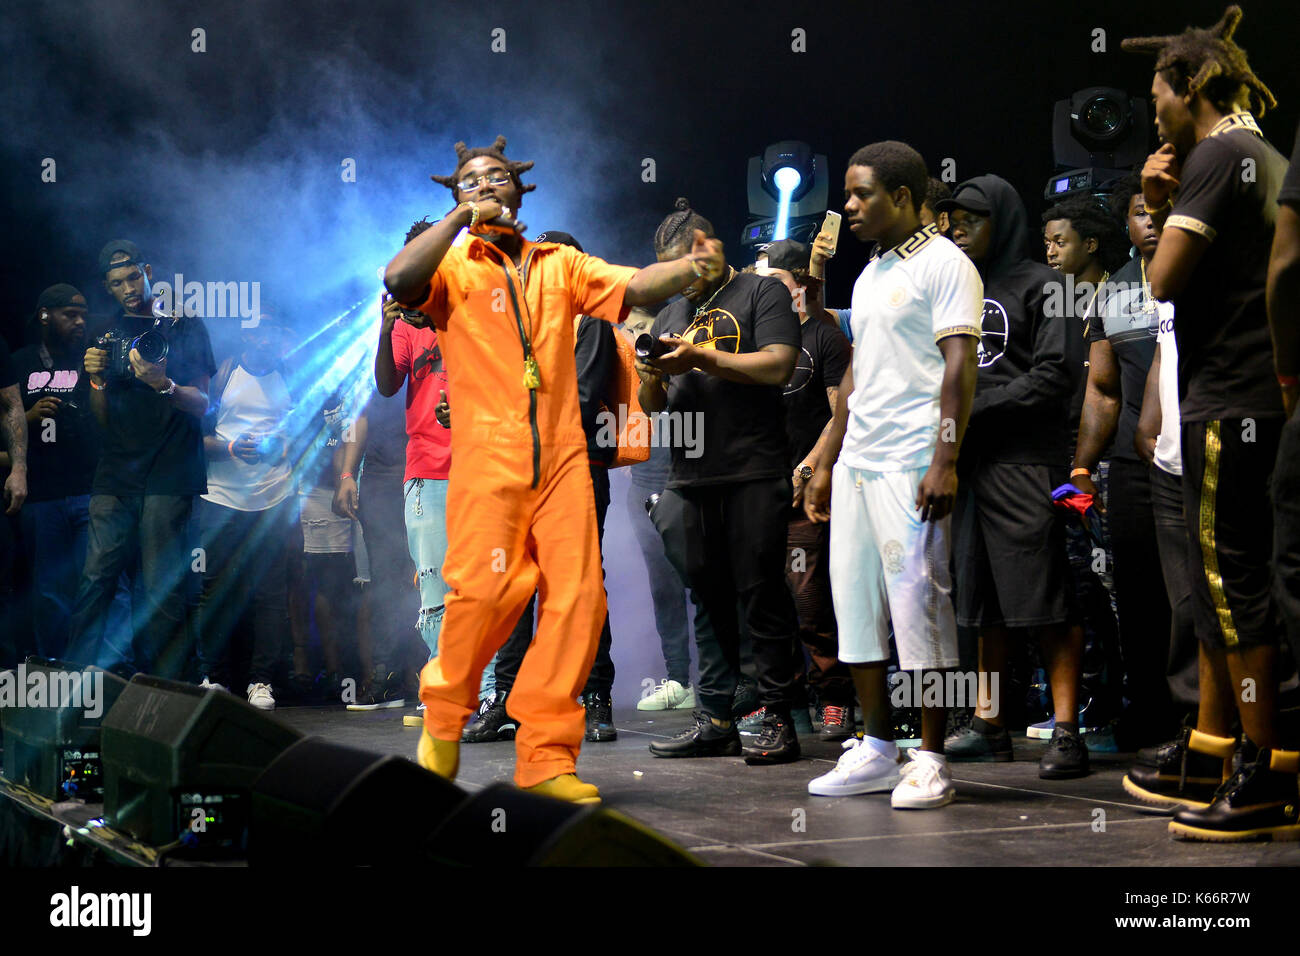 Kodak Black performs on stage at his Homecoming Concert at Watsco Center in Coral Gables, Florida, in first show since his release from prison in June.  Featuring: Kodak Black Where: Coral Gables, Florida, United States When: 10 Aug 2017 Credit: JLN Photography/WENN.com Stock Photo